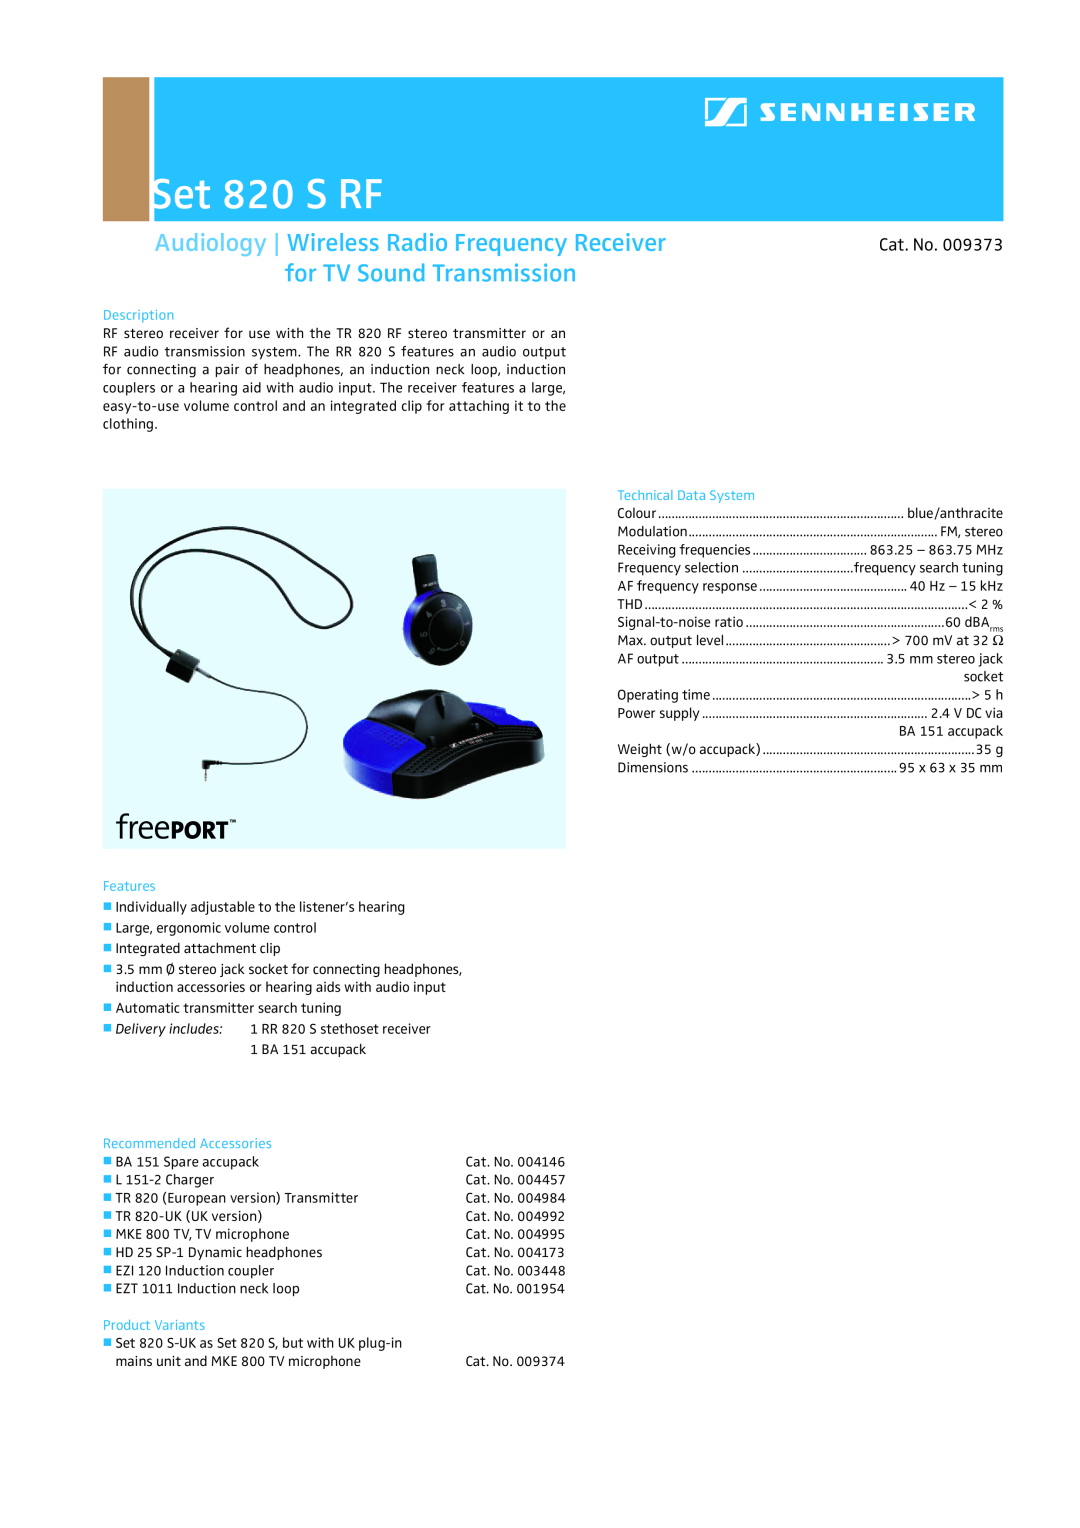 Sennheiser dimensions Set 820 S RF, Audiology Wireless Radio Frequency Receiver, for TV Sound Transmission, Cat. No 